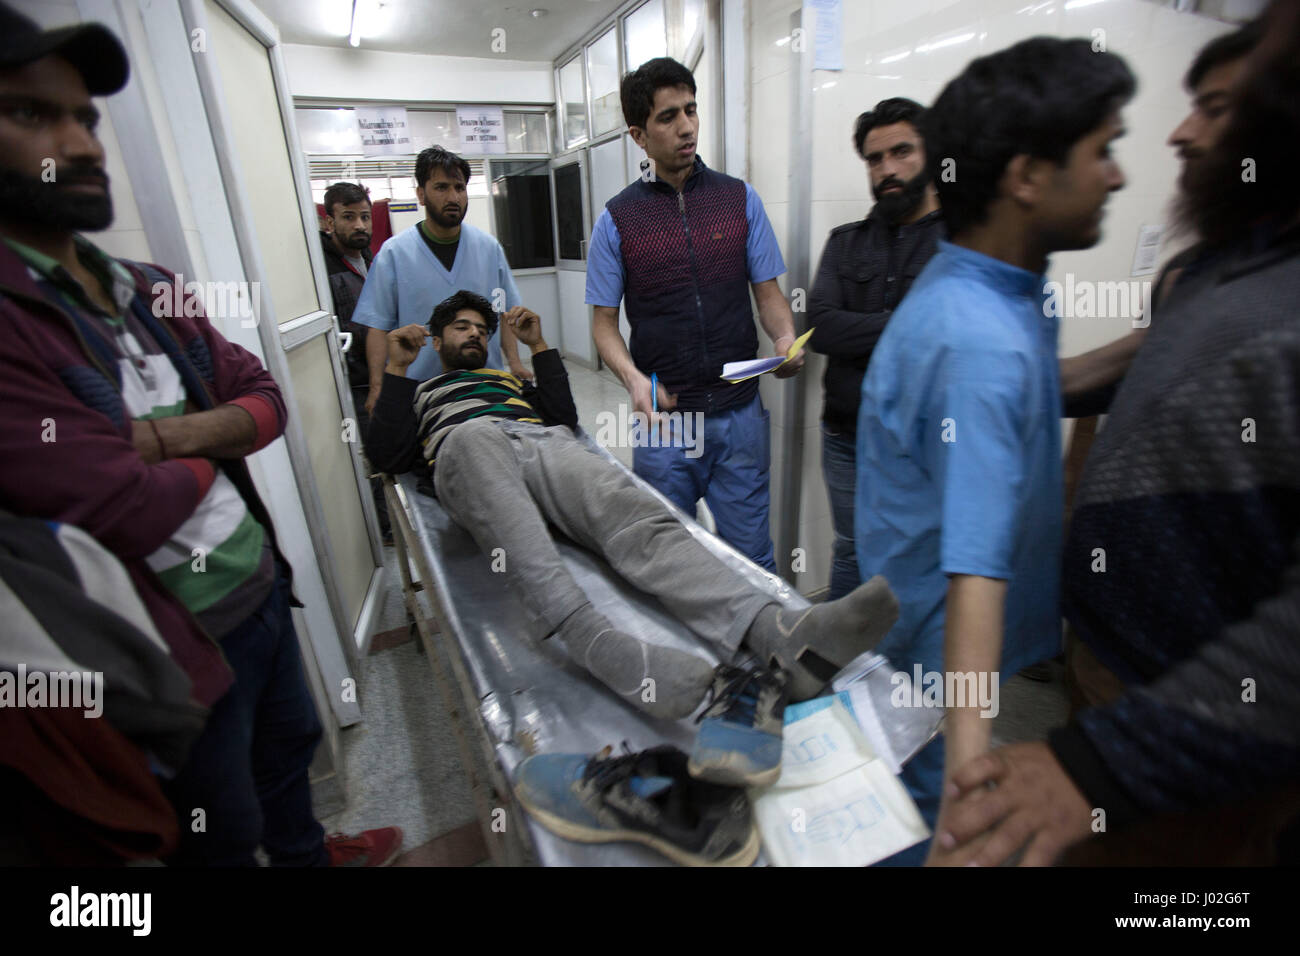 Srinagar, Indian-controlled Kashmir. 9th Apr, 2017. Paramedics transfer a wounded person inside a hospital in Srinagar, summer capital of Indian-controlled Kashmir, April 9, 2017. At least three persons were killed and several others injured on Sunday when Indian security forces opened fire on a stone-pelting mob that stormed a polling station in Indian-controlled Kashmir's parliamentary constituency of Srinagar. Credit: Javed Dar/Xinhua/Alamy Live News Stock Photo